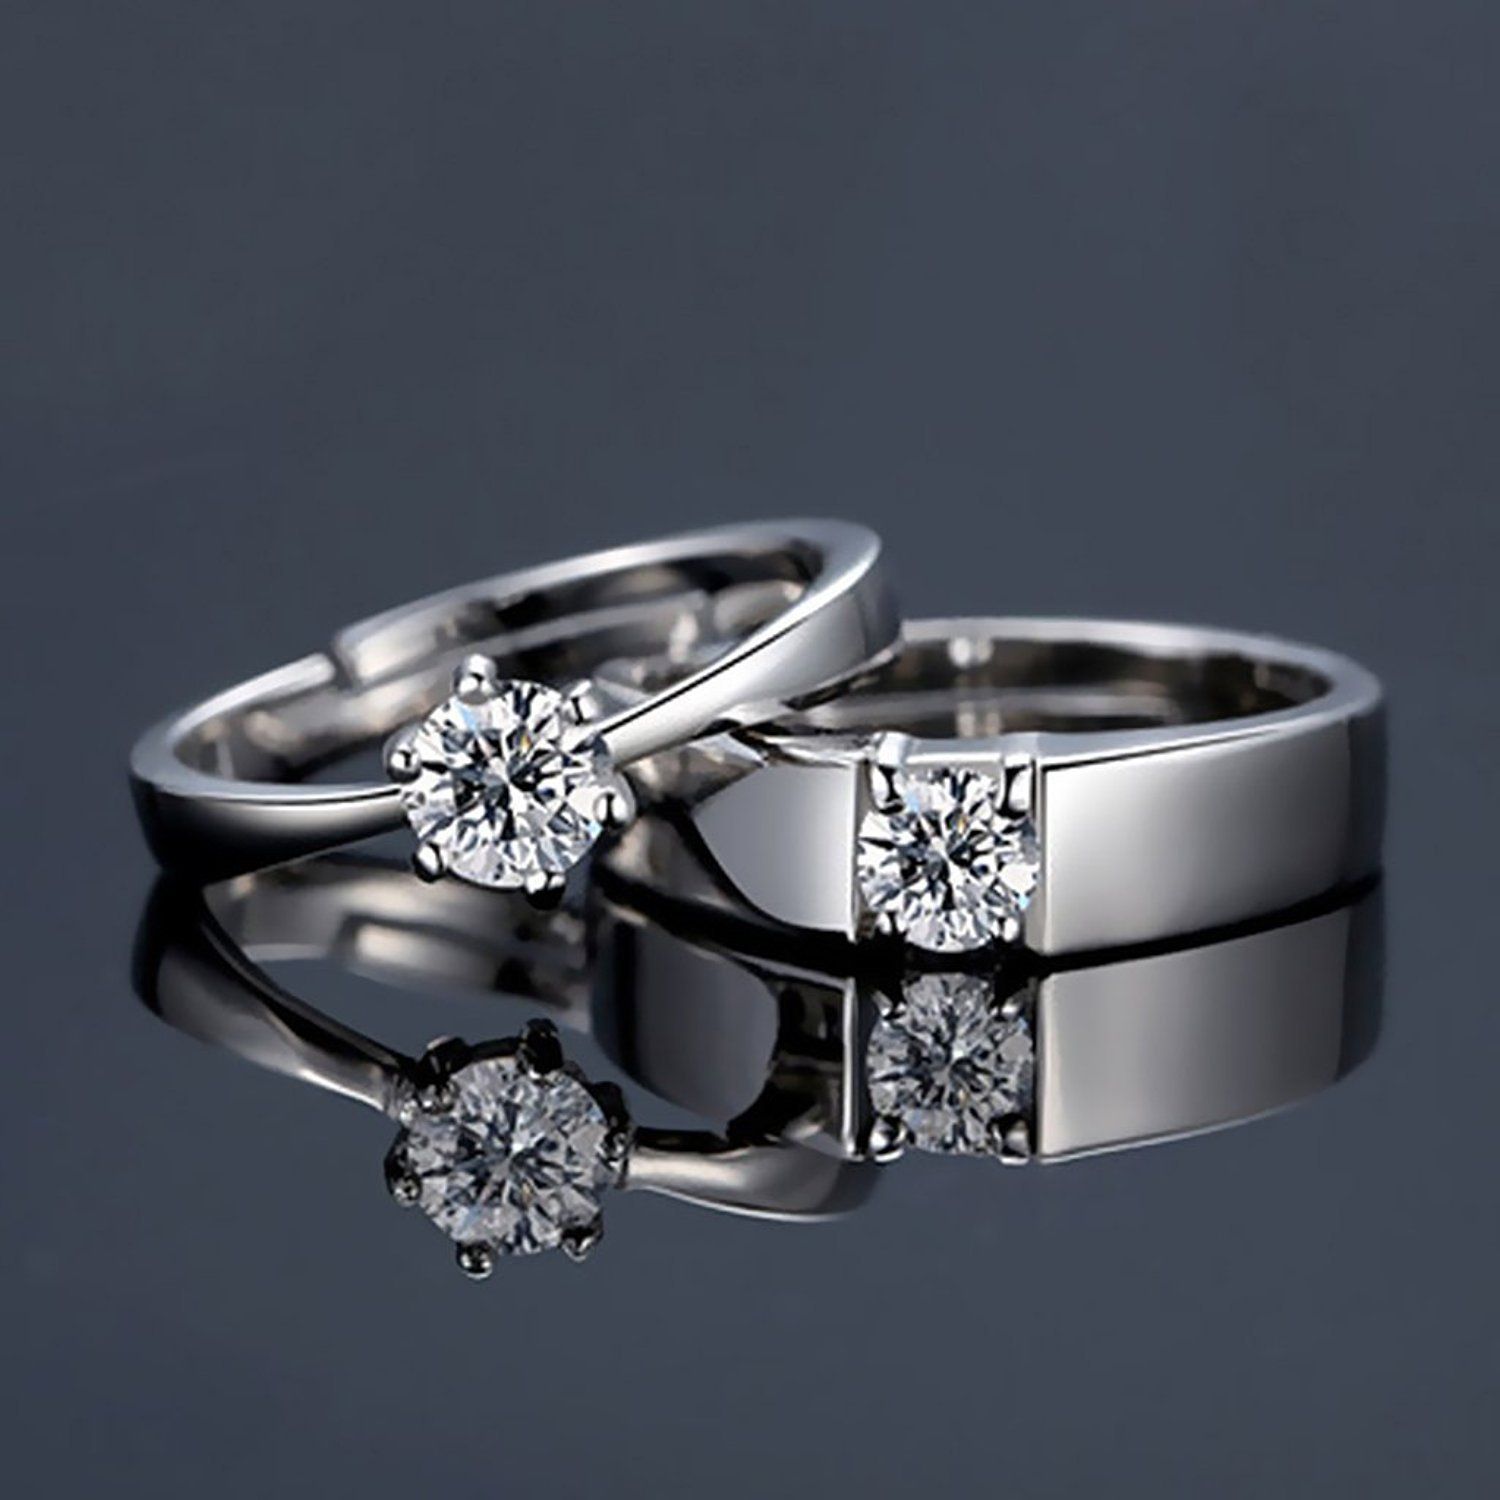 Couple Ring Set 07 In Silver - STORiES Hong Kong